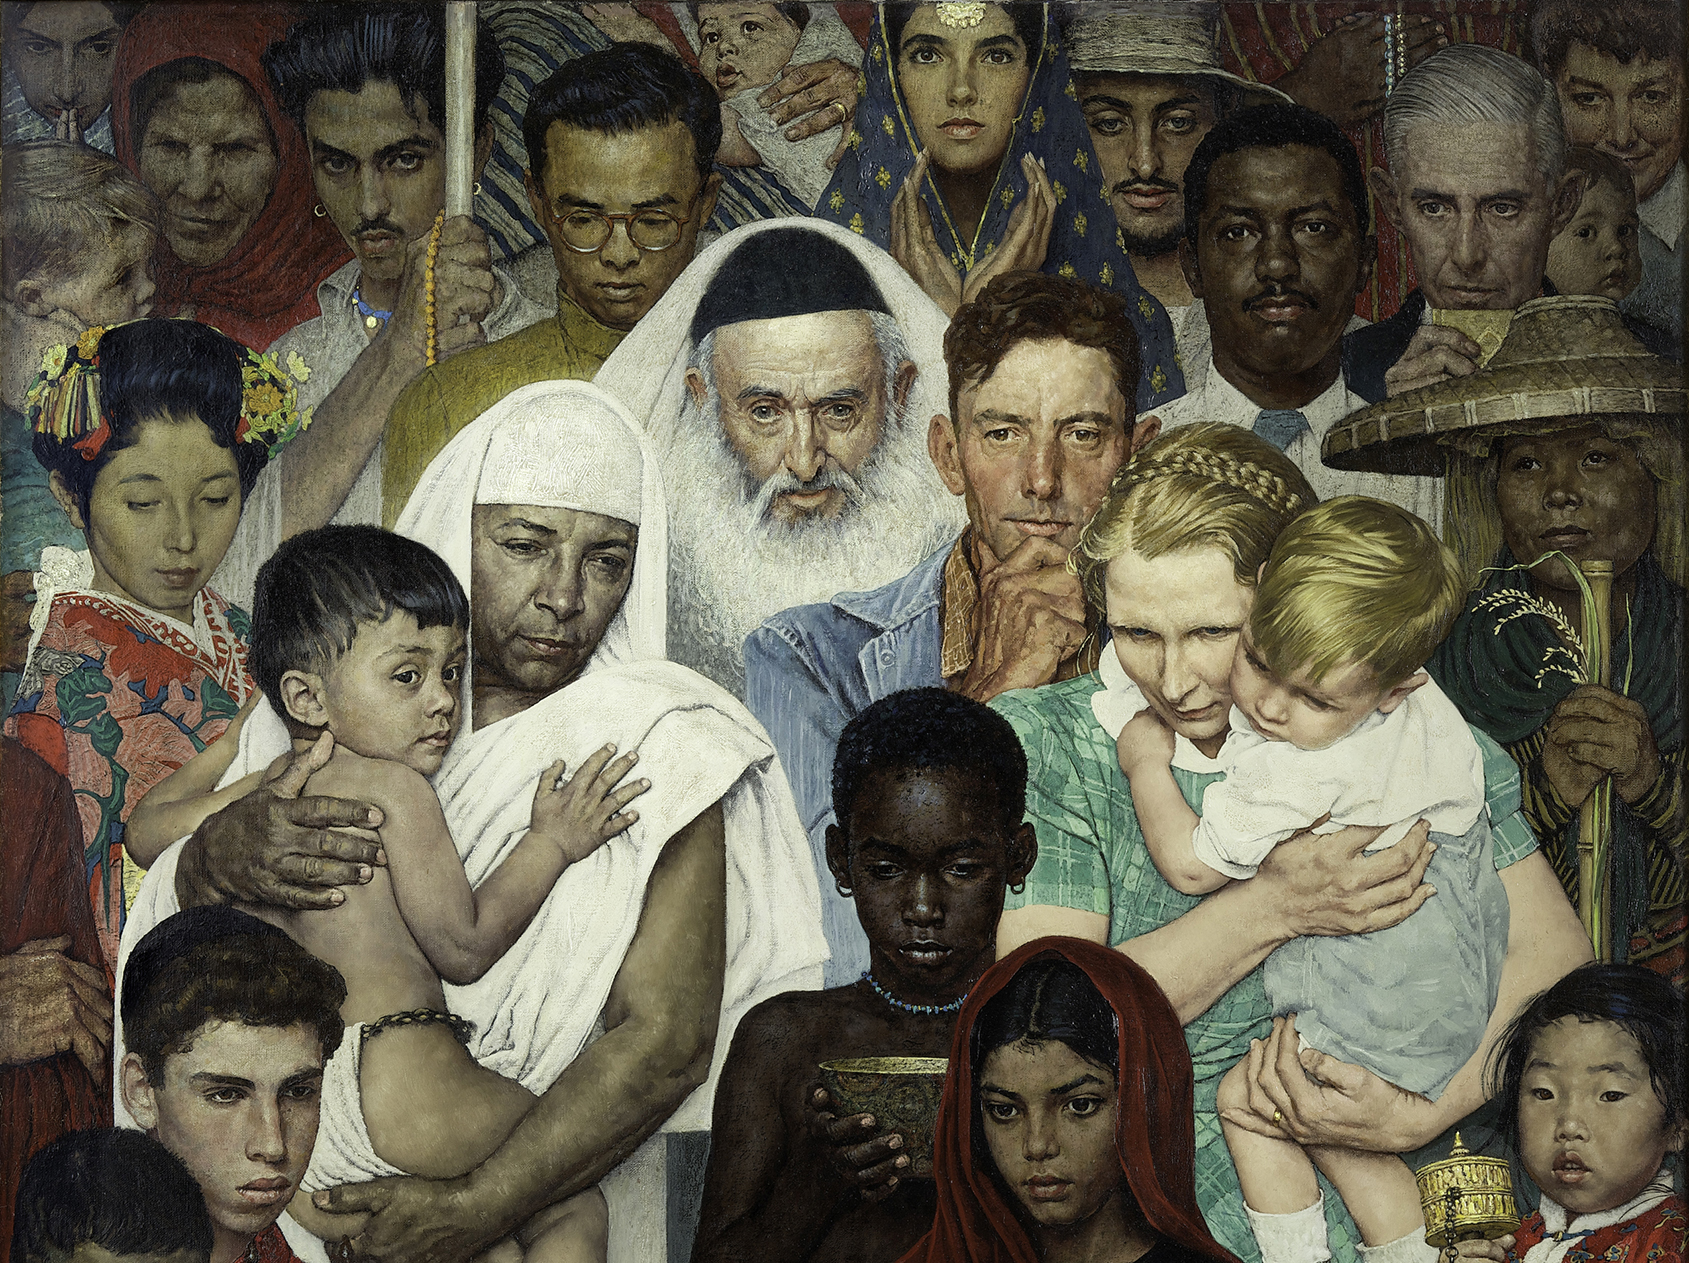 MFAH dives into history with ‘Norman Rockwell: American Freedom’ exhibit